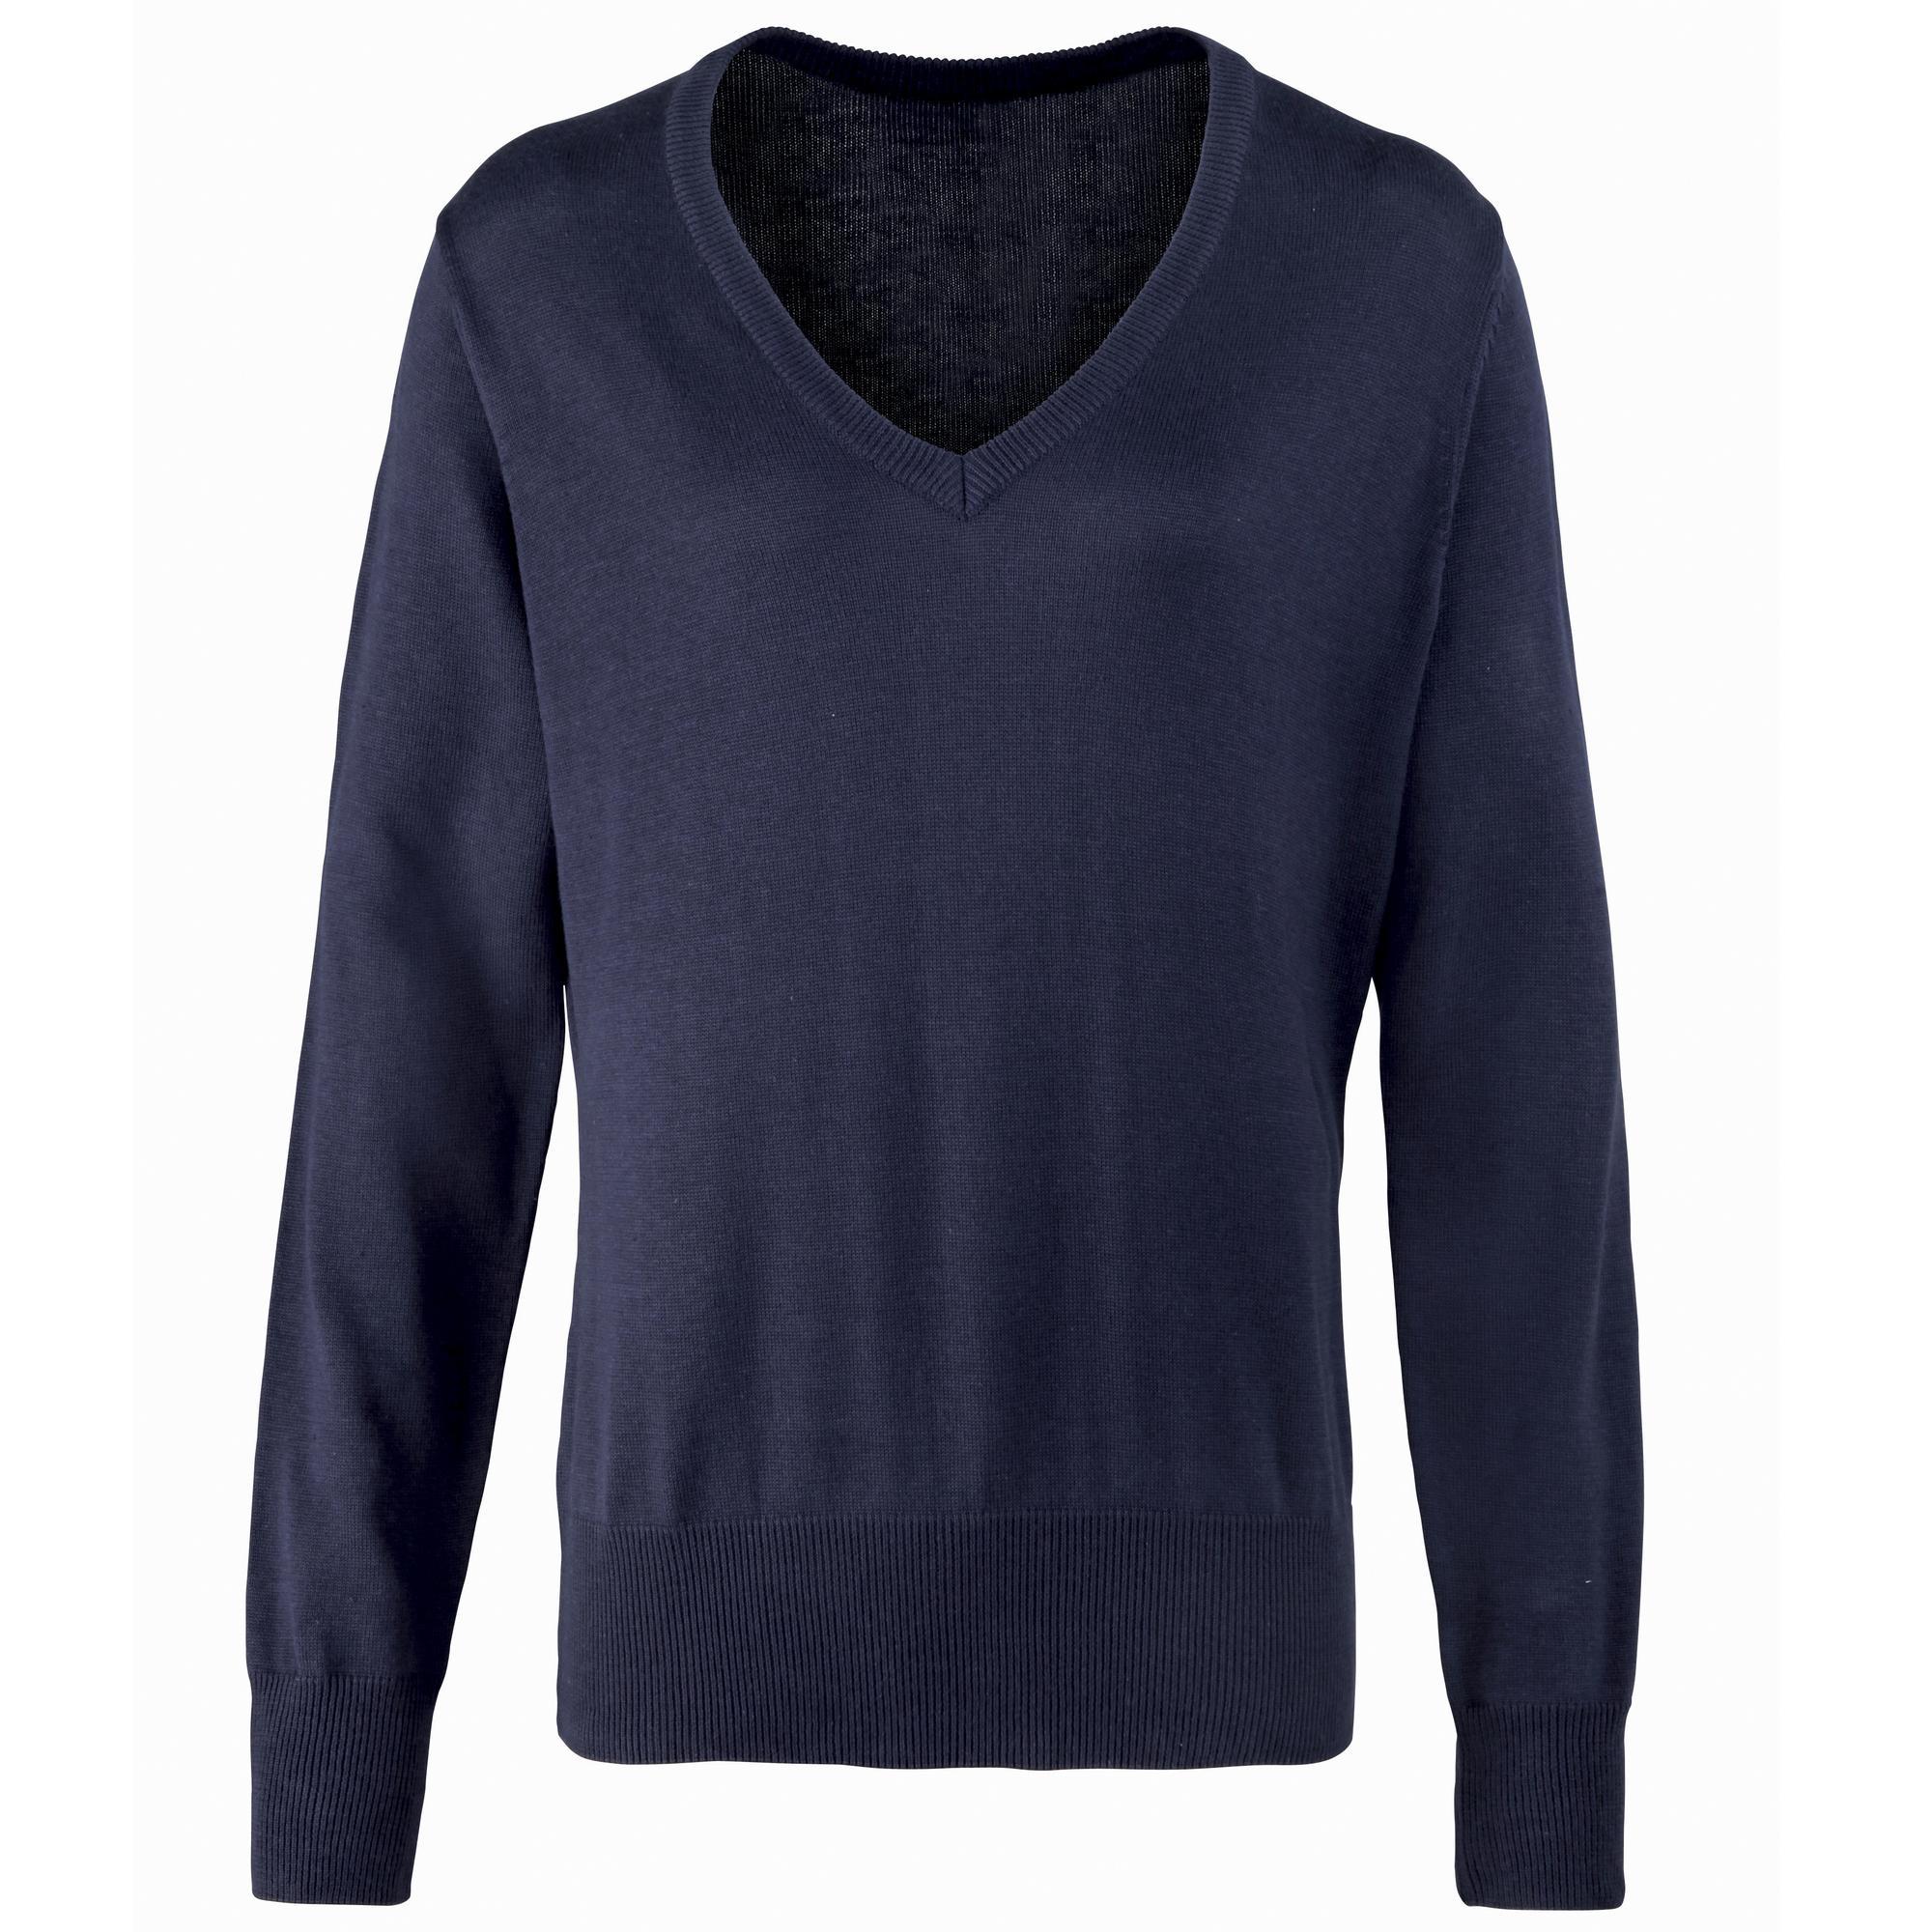 Premier Womens/Ladies V-Neck Knitted Sweater / Top (Navy) (14)